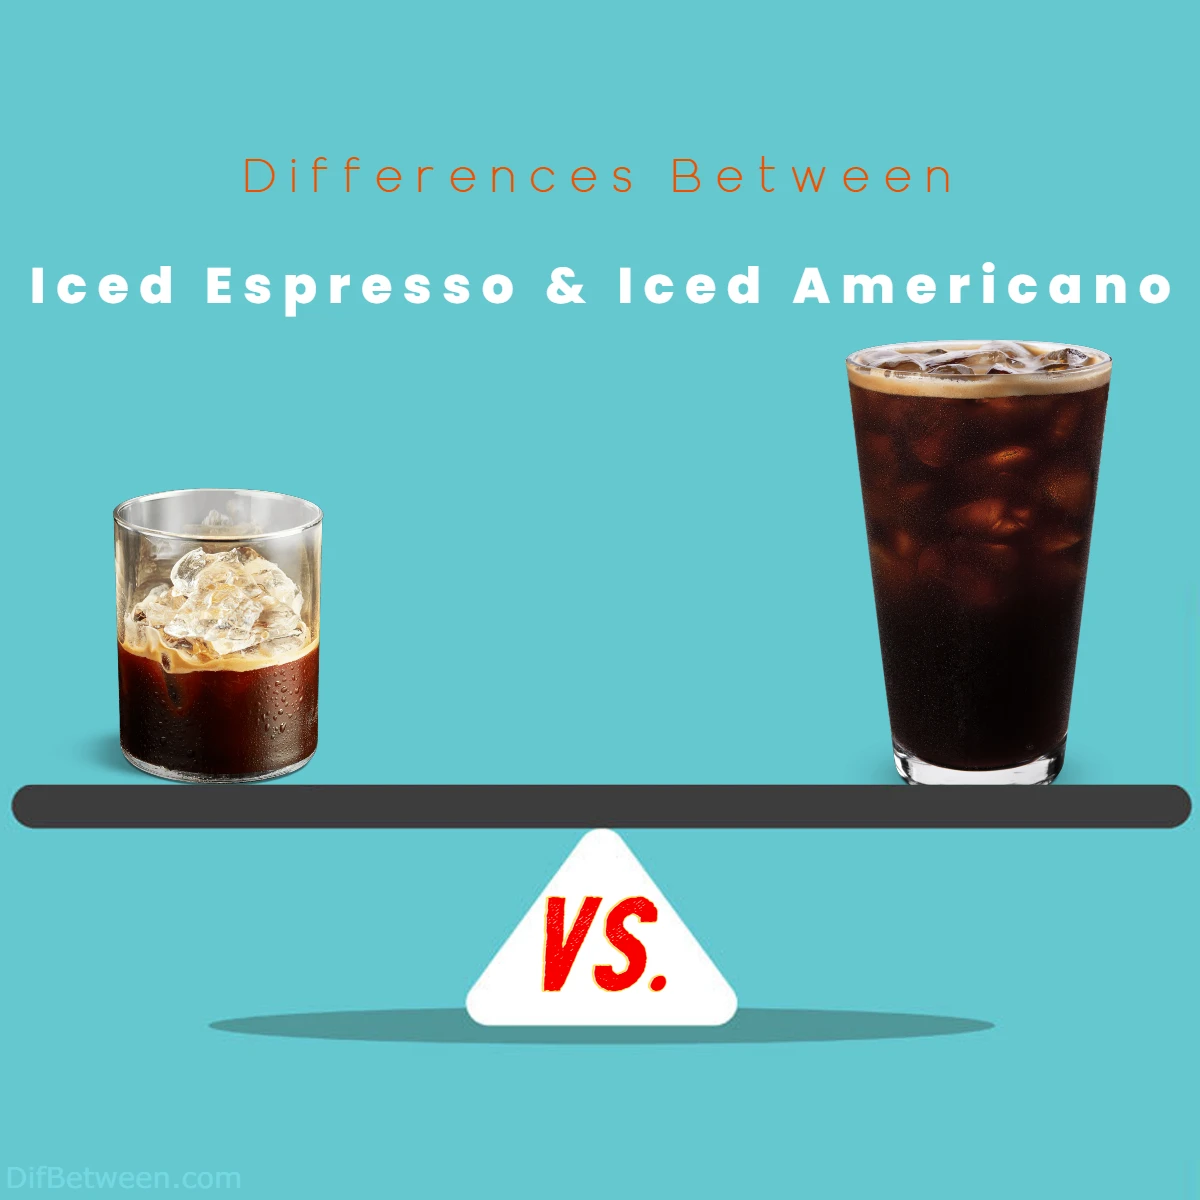 Differences Between Iced Americano and Iced Espresso